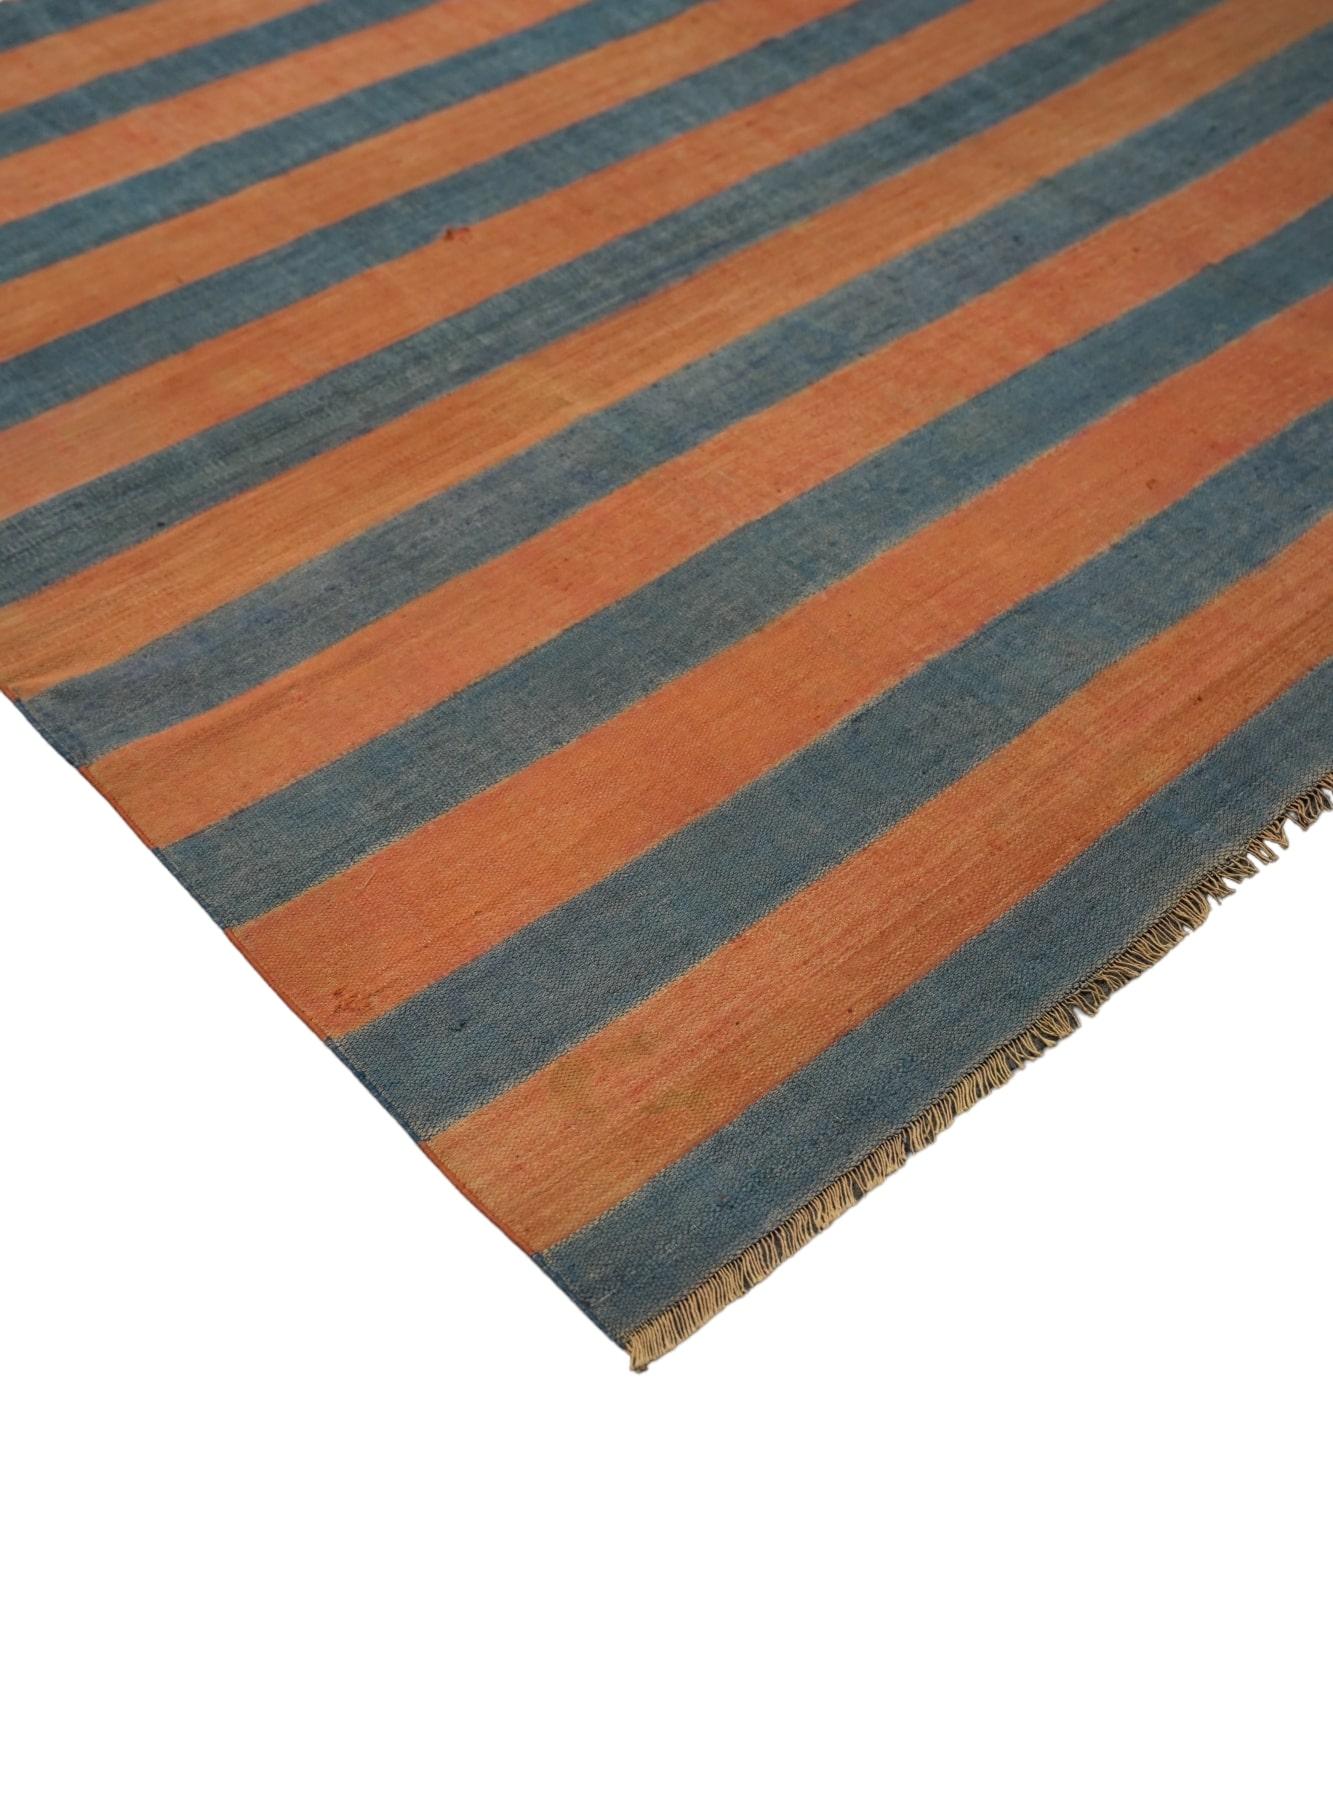 Hand-Woven Vintage Dhurrie Rug, with Rust and Blue Stripes, from Rug & Kilim For Sale